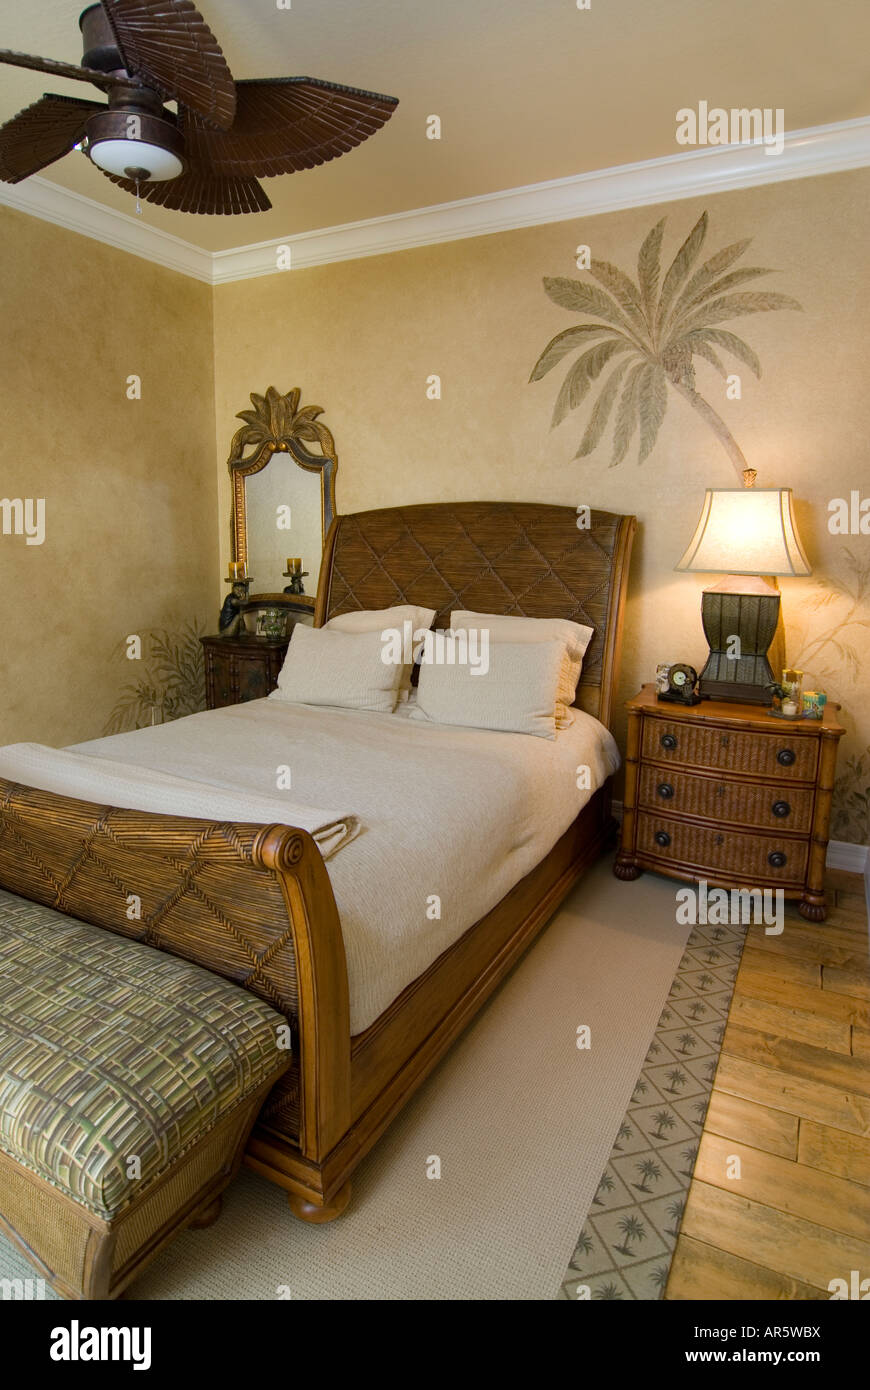 Tropical style bedroom with ceiling fan Stock Photo